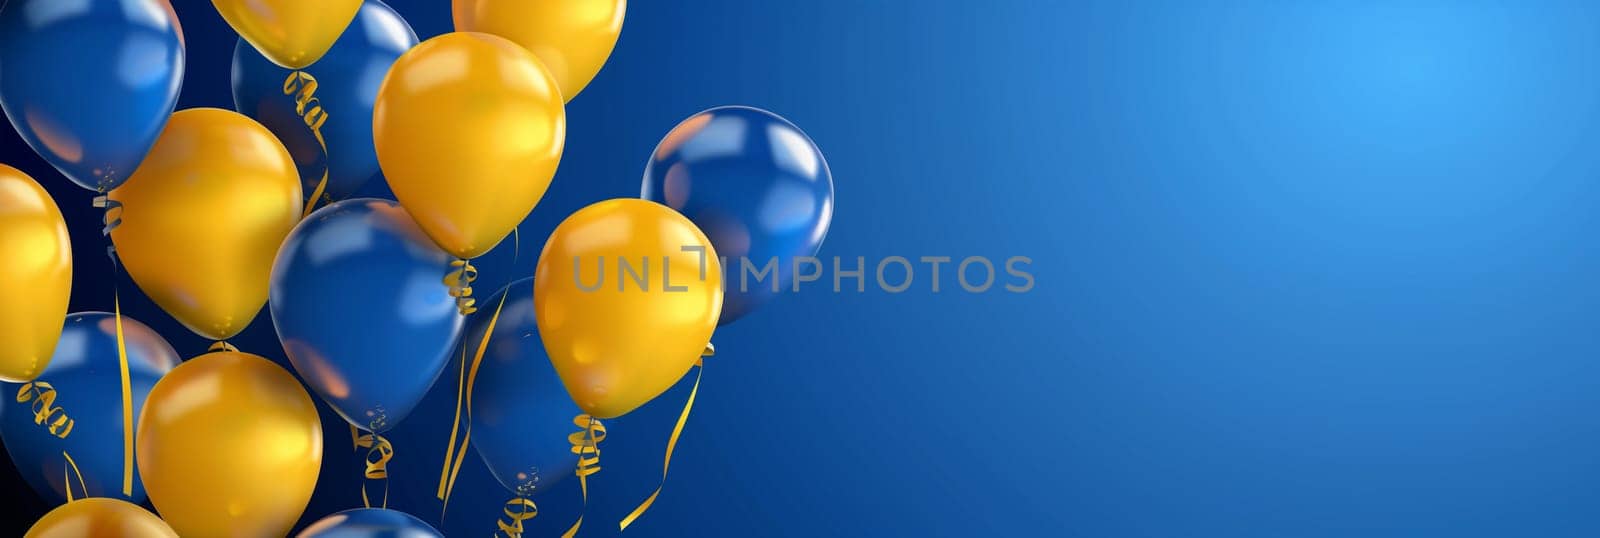 Blue and Yellow Balloons on Blue Background by Sd28DimoN_1976